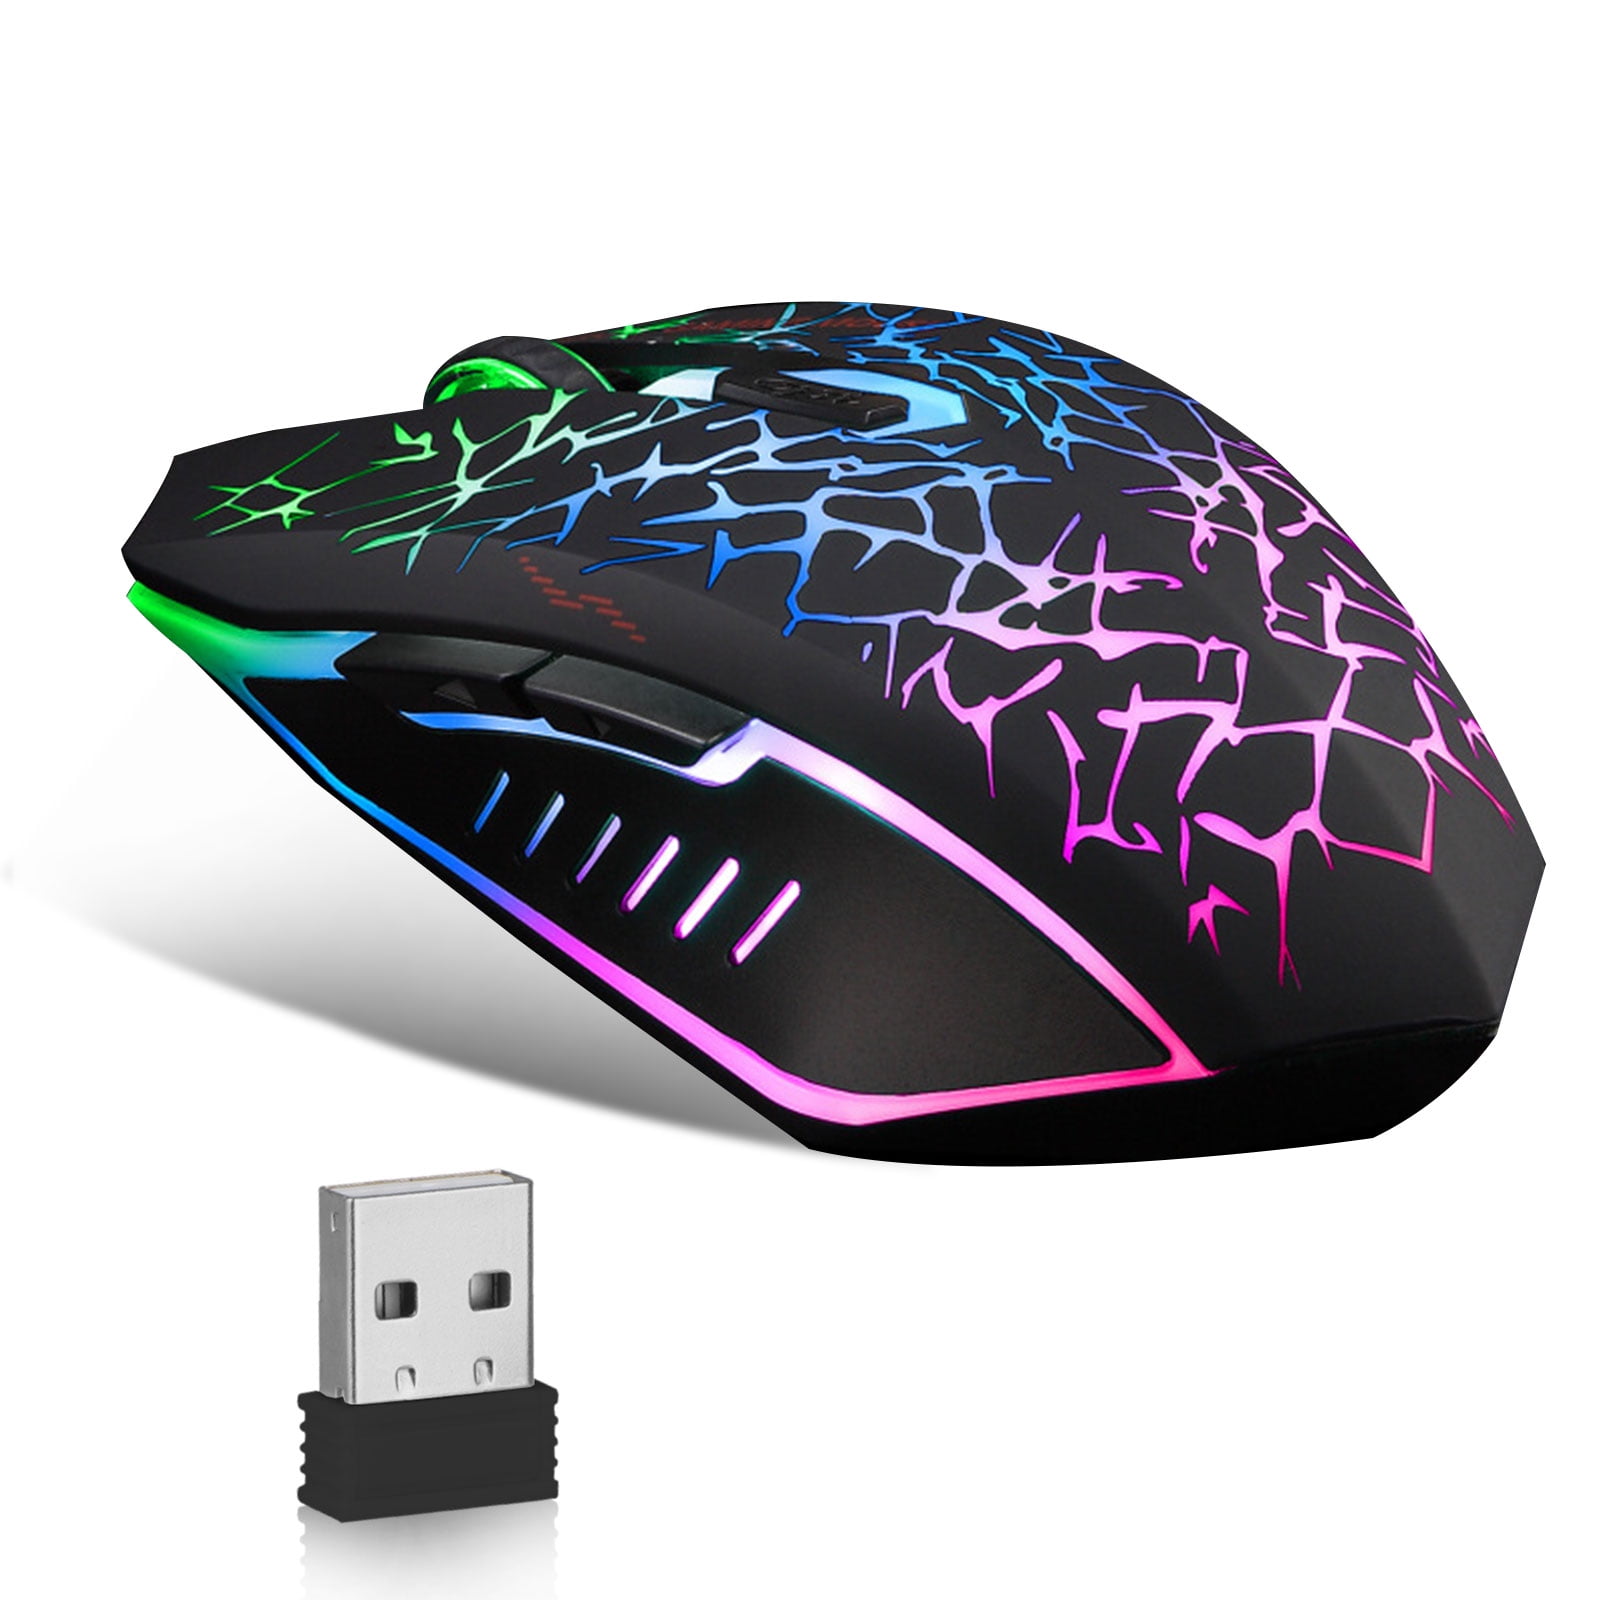 Adjustable Optical Colorful LED Wired Gaming Game Mice Mouse For Laptop PC Mouse 